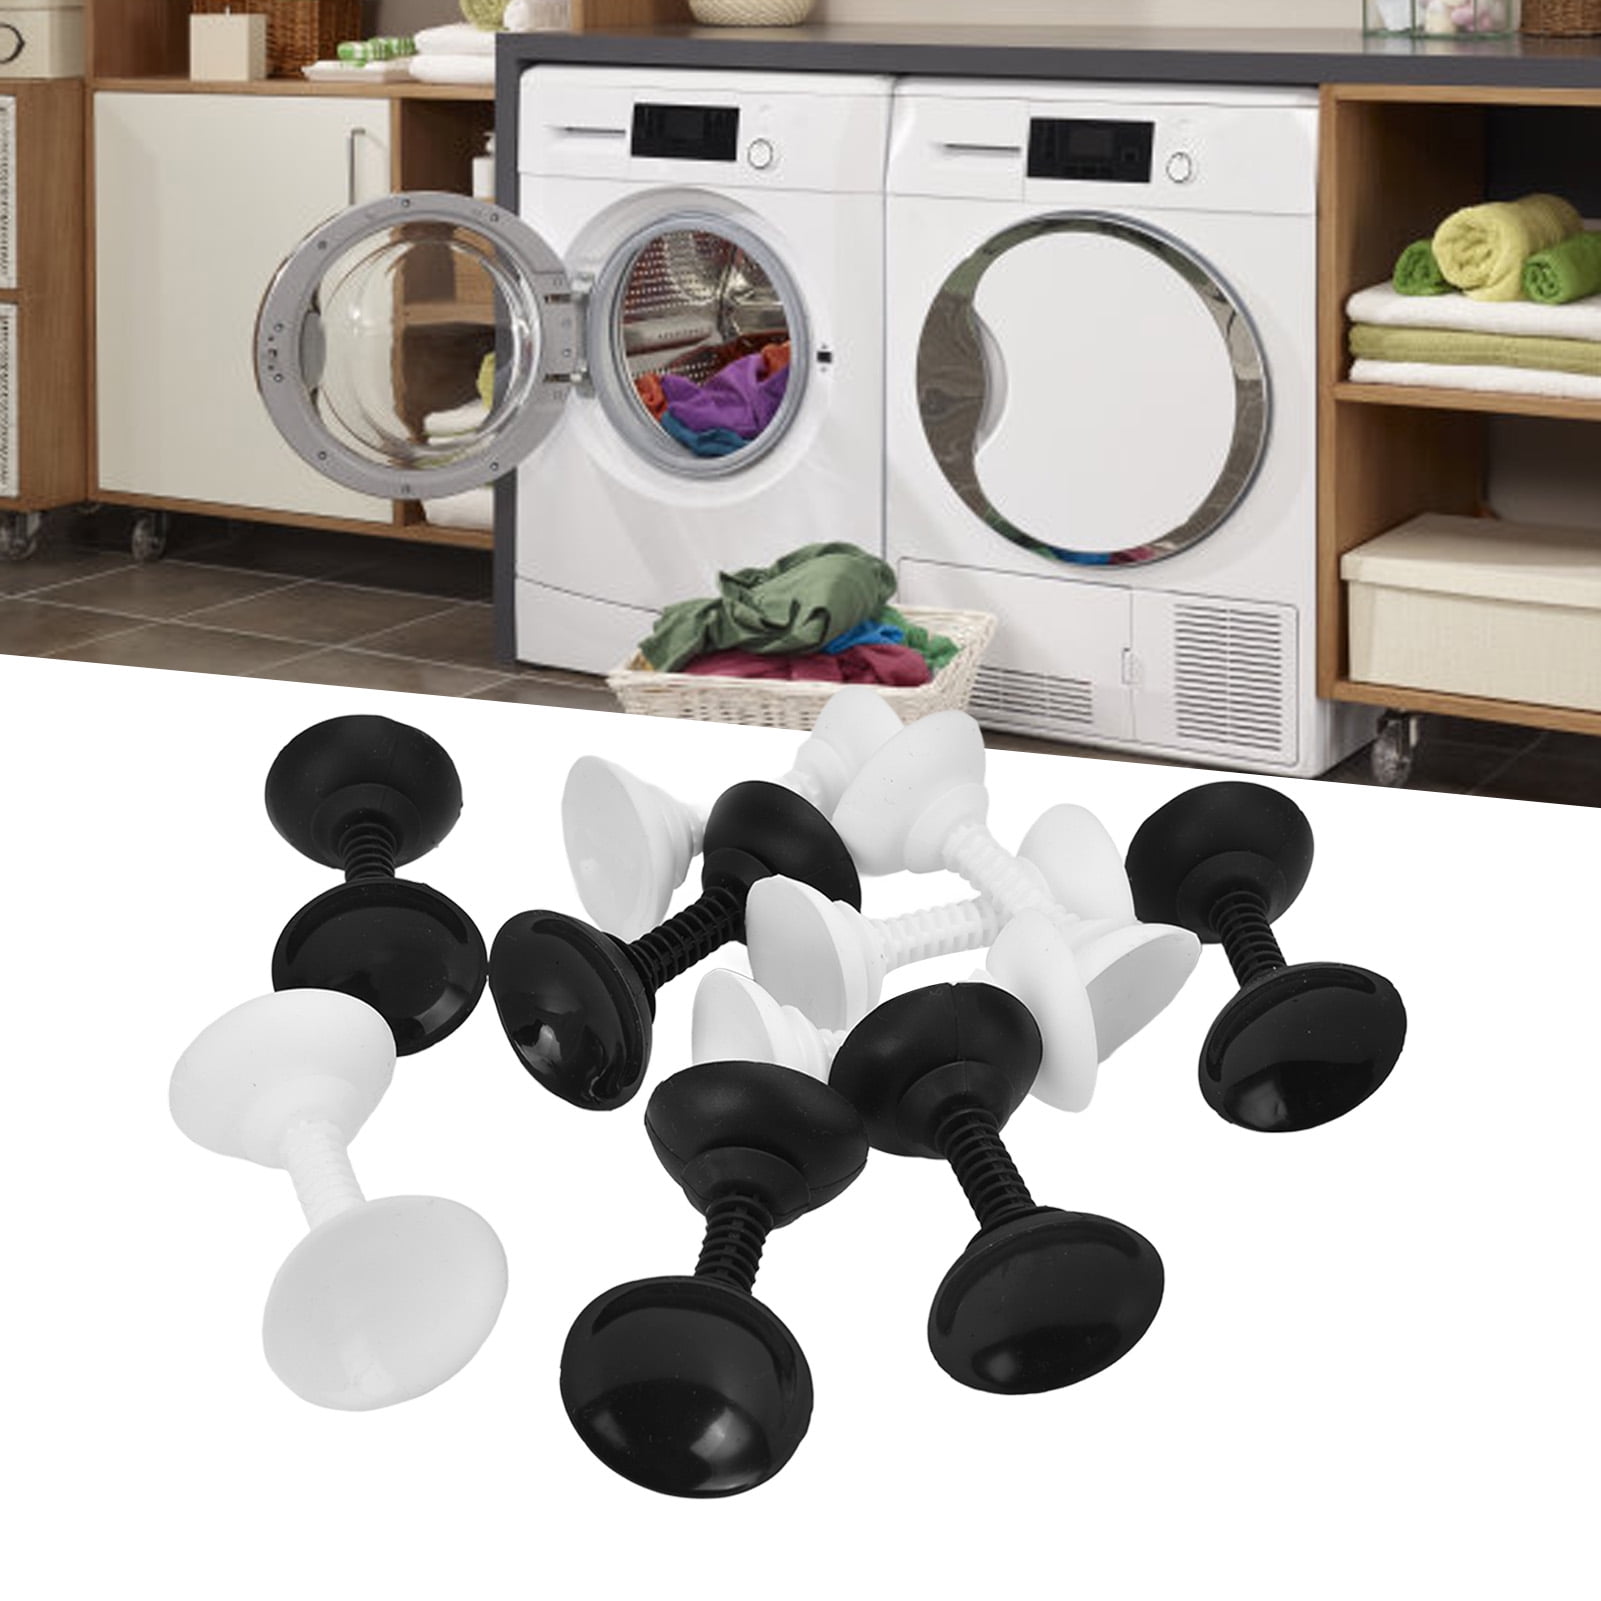 Details about   Household Essentials 05100 Rear Display Over-The-Washer Storage ShelfOrganize 